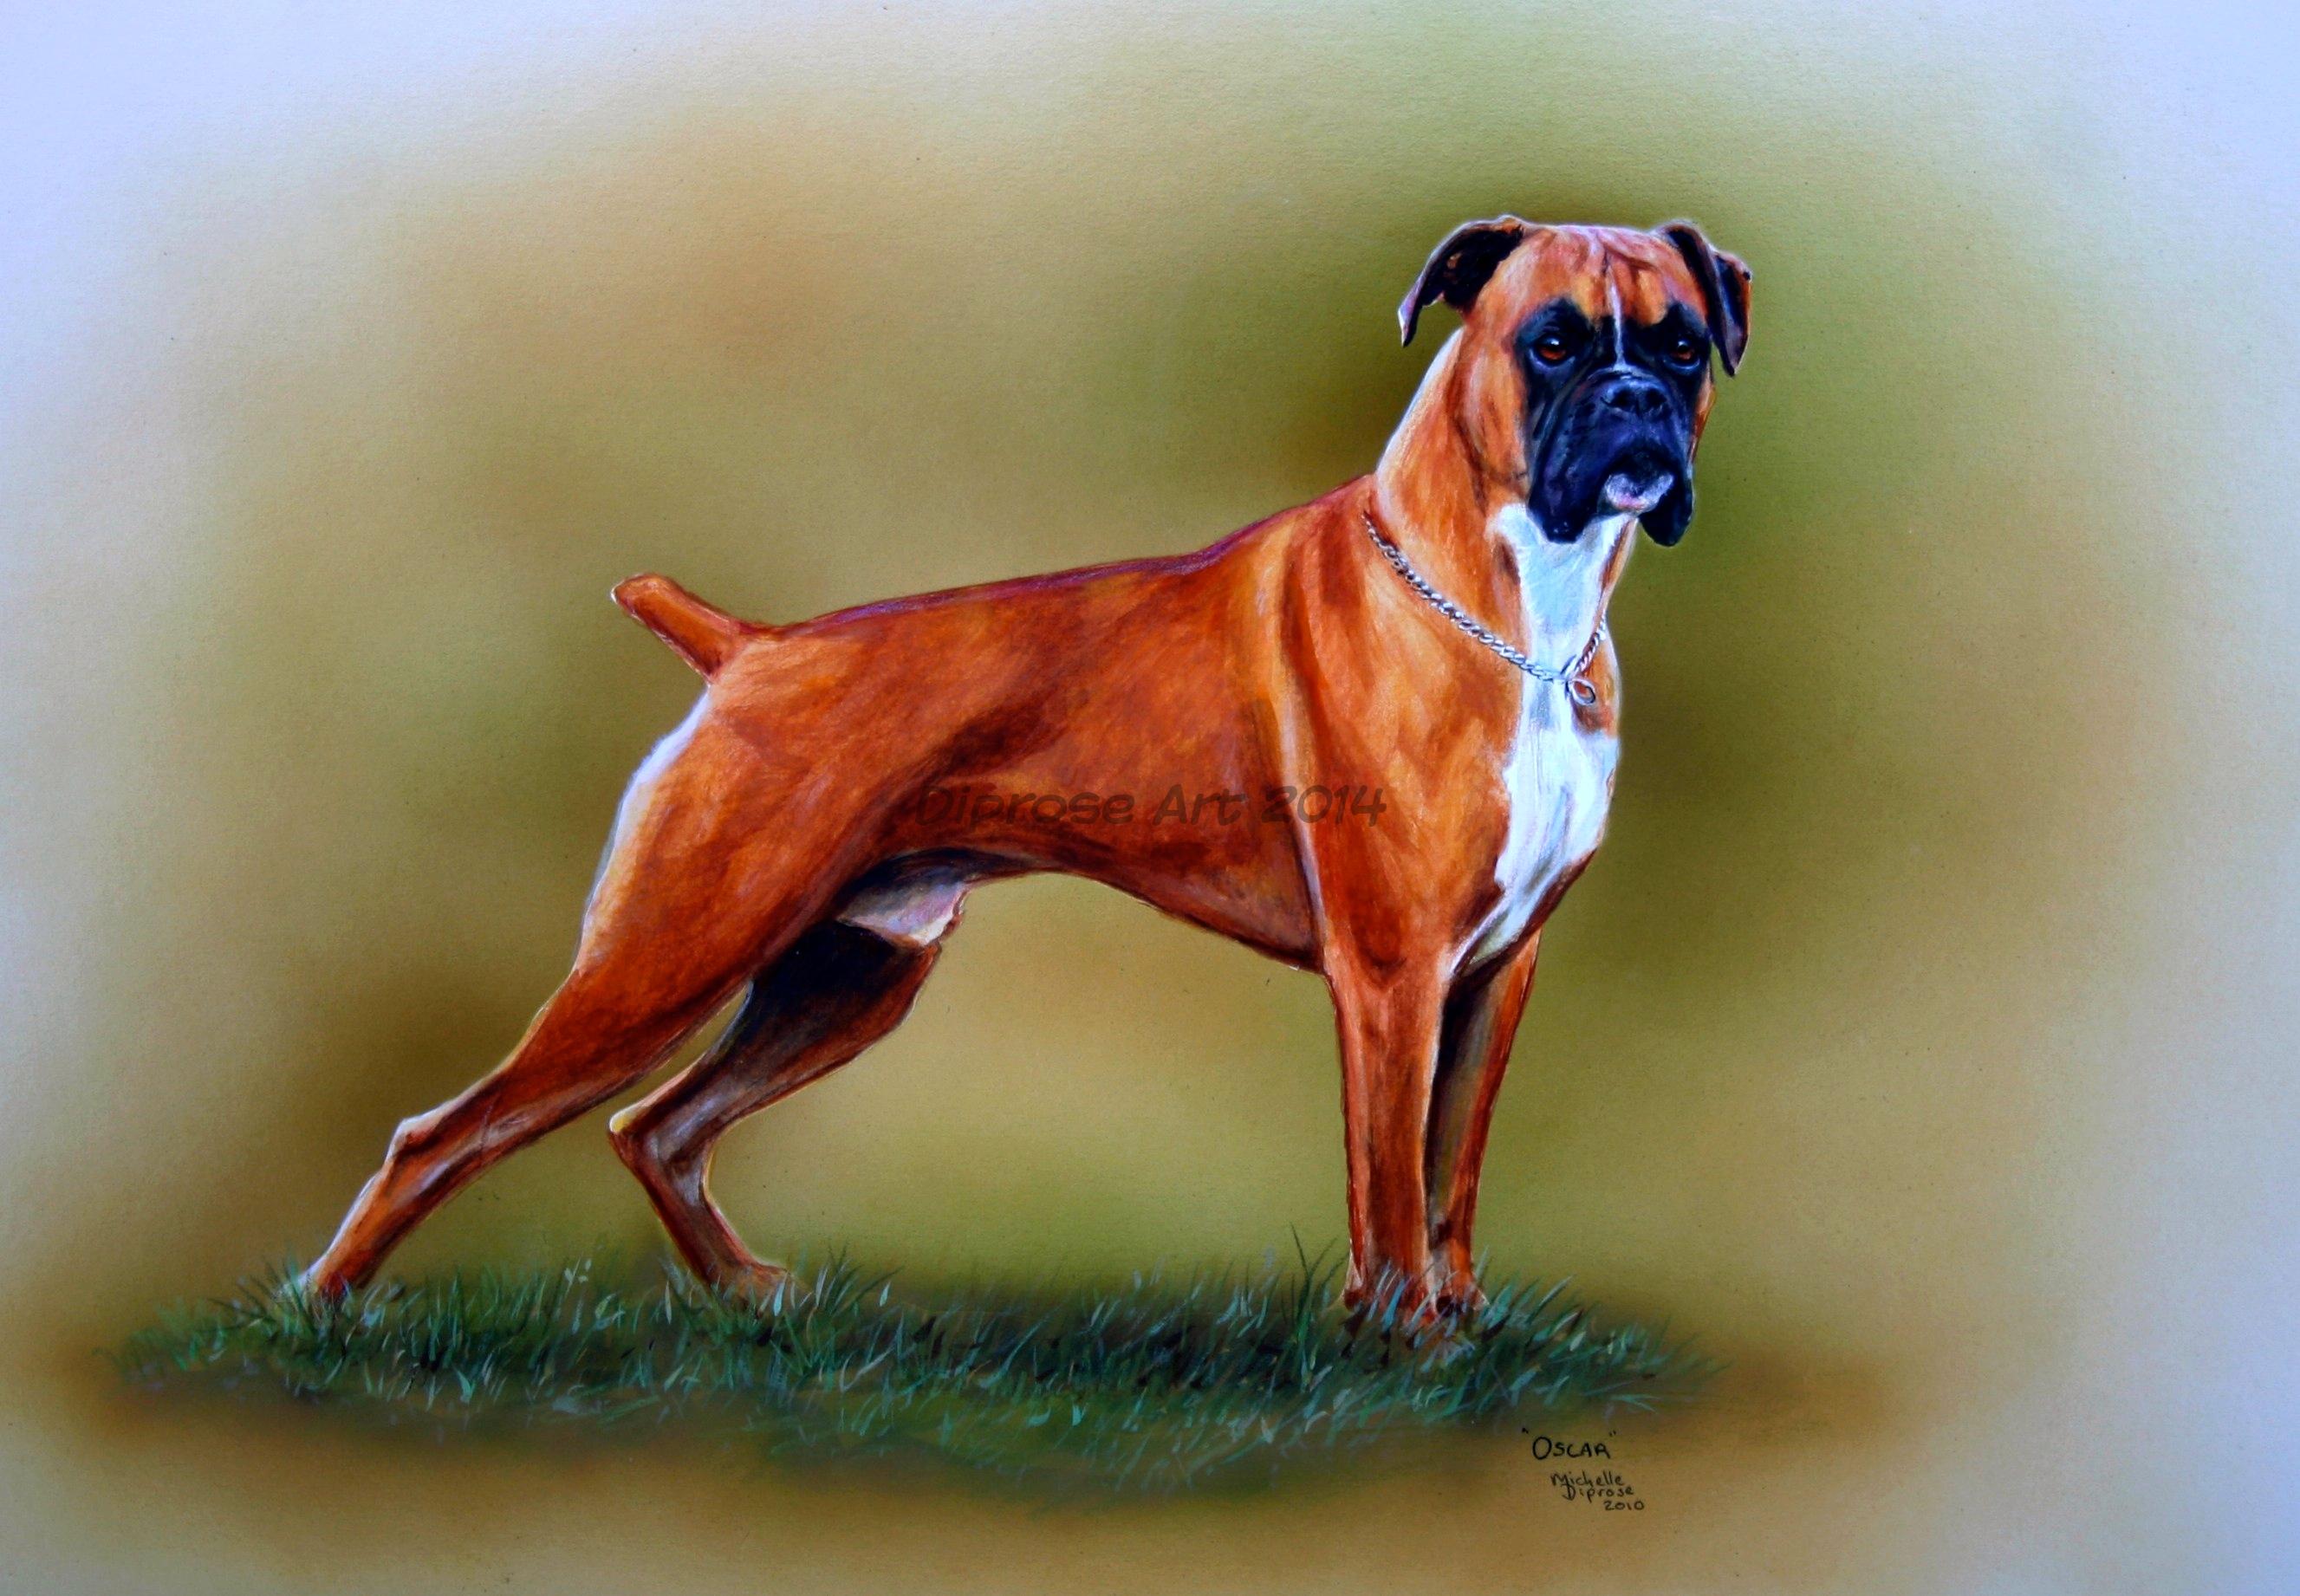 Acrylics on board - approx A3 - pet dog portrait - This handsome boxer had a natural proud stance so had to be painted in full as he had such presence. 